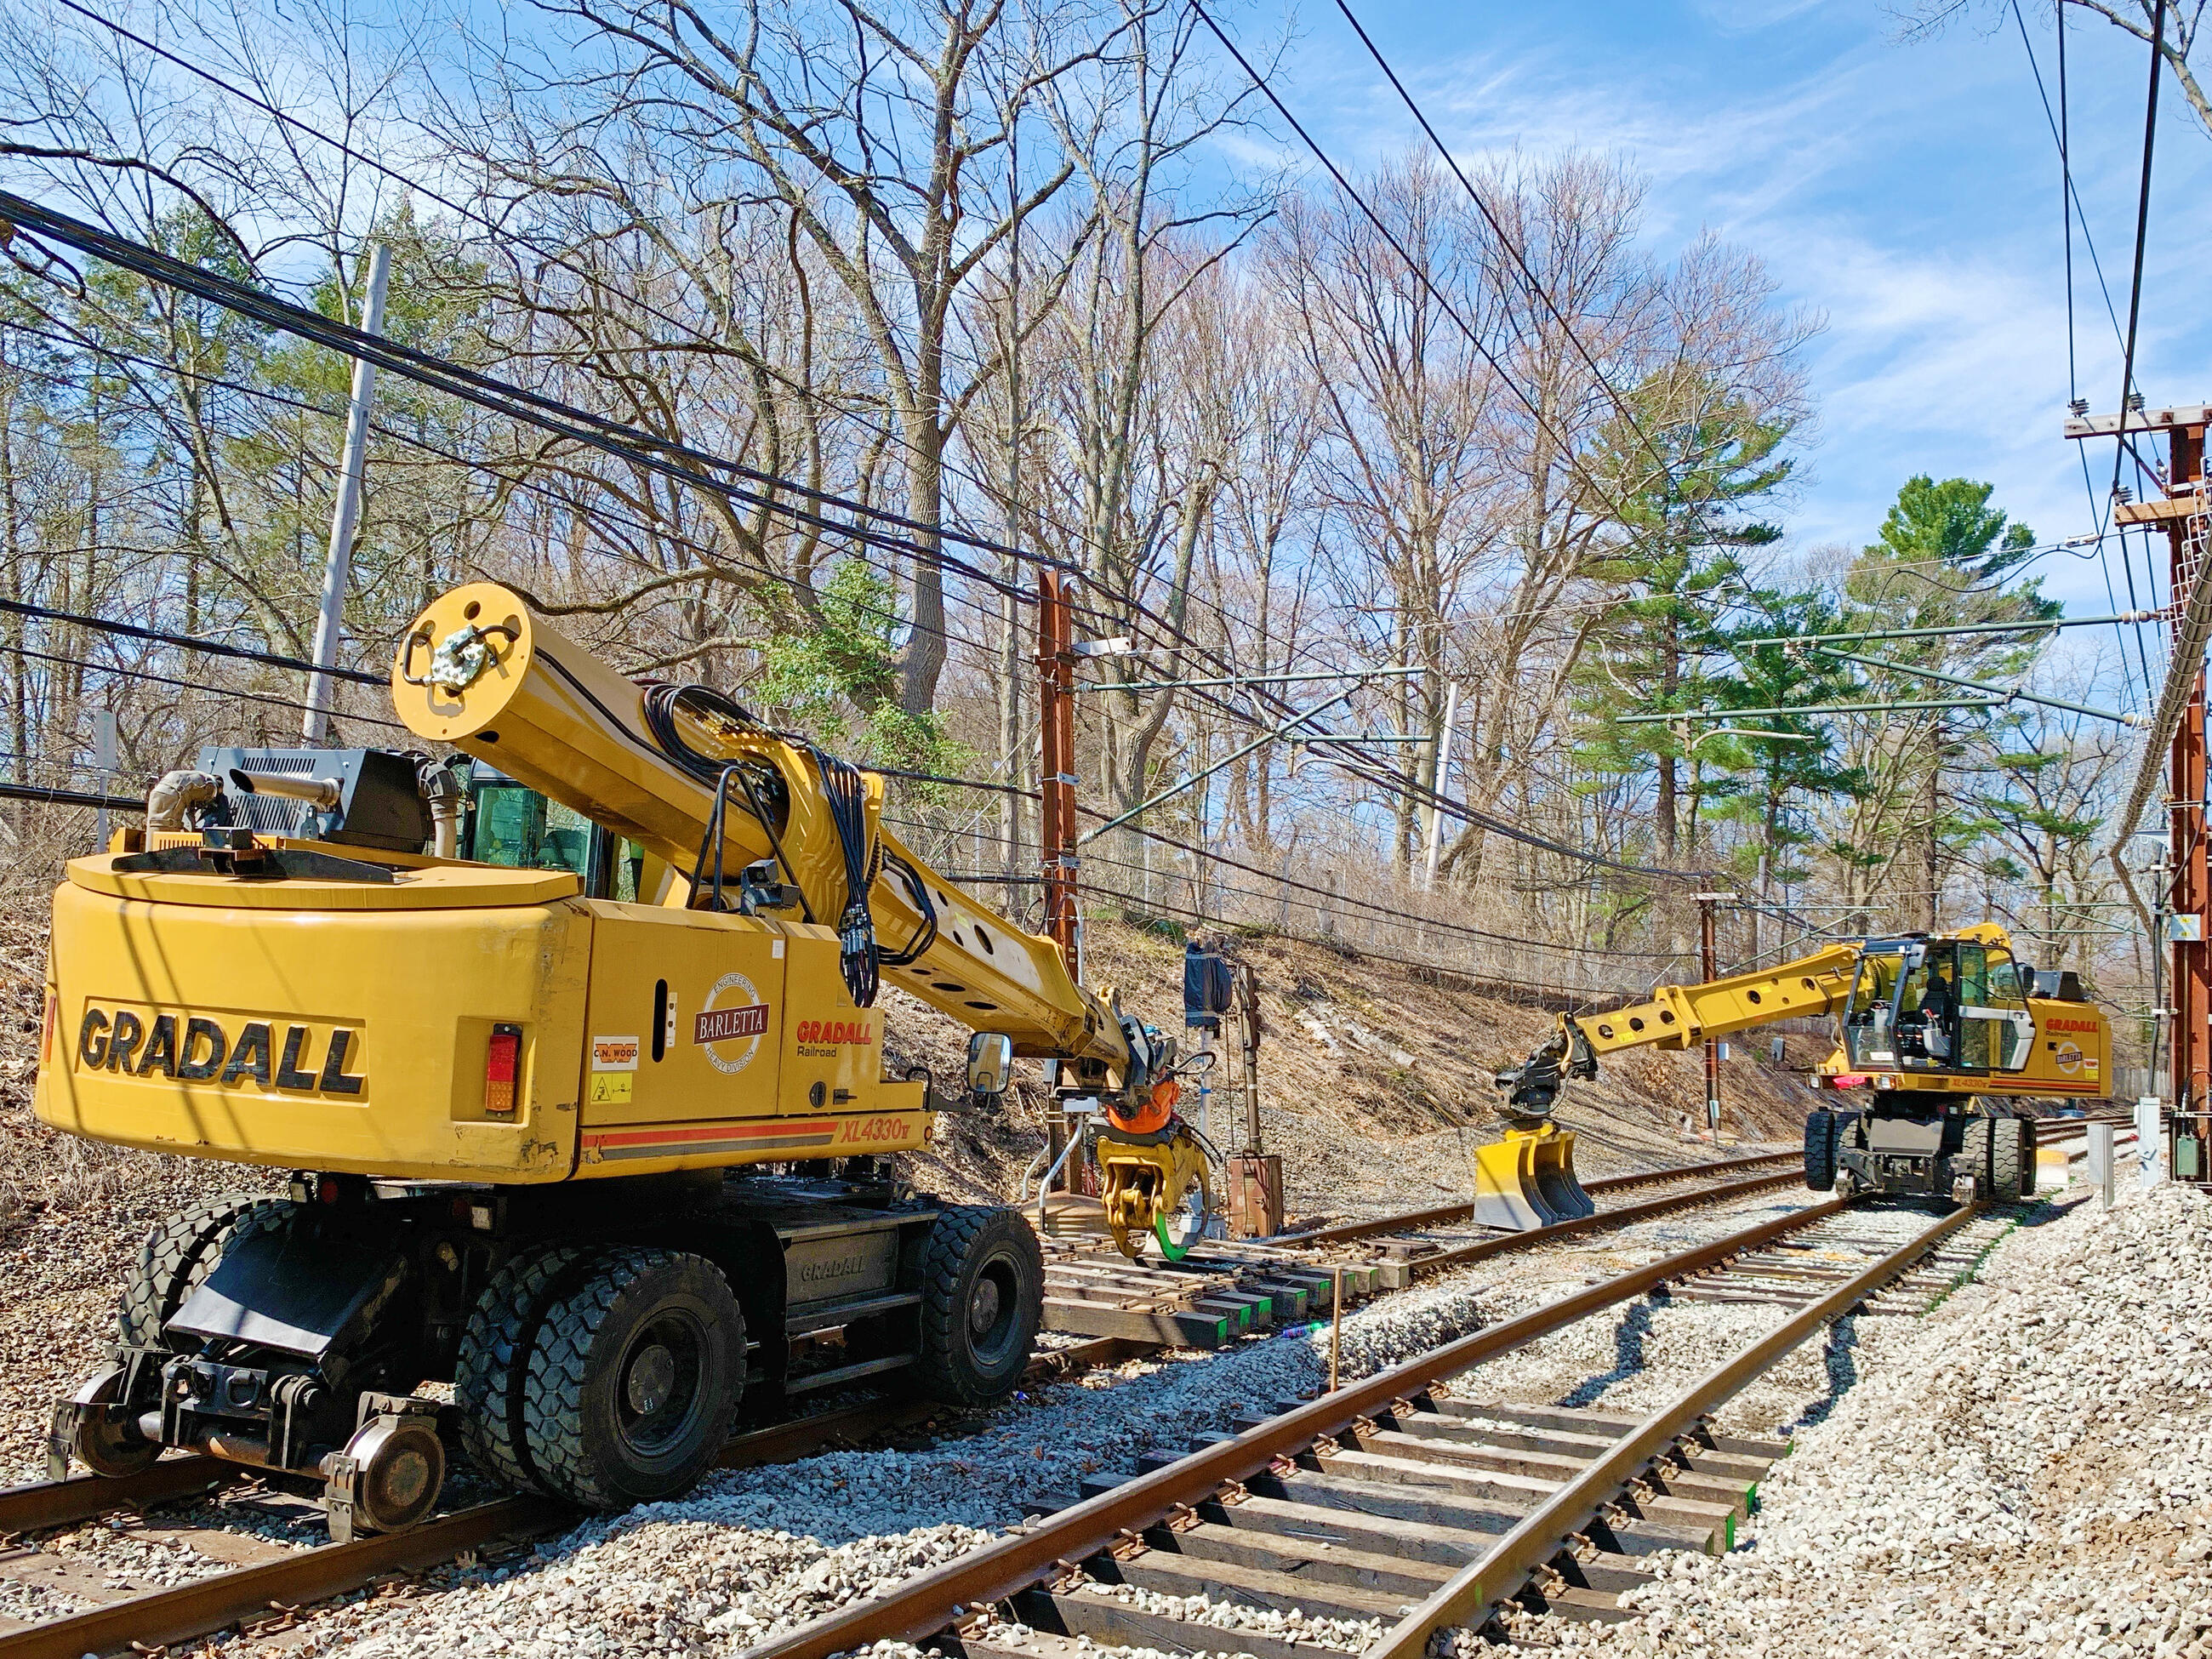 Crews replace rail ties on the Green Line D as part of the D Branch Track and Signal Replacement